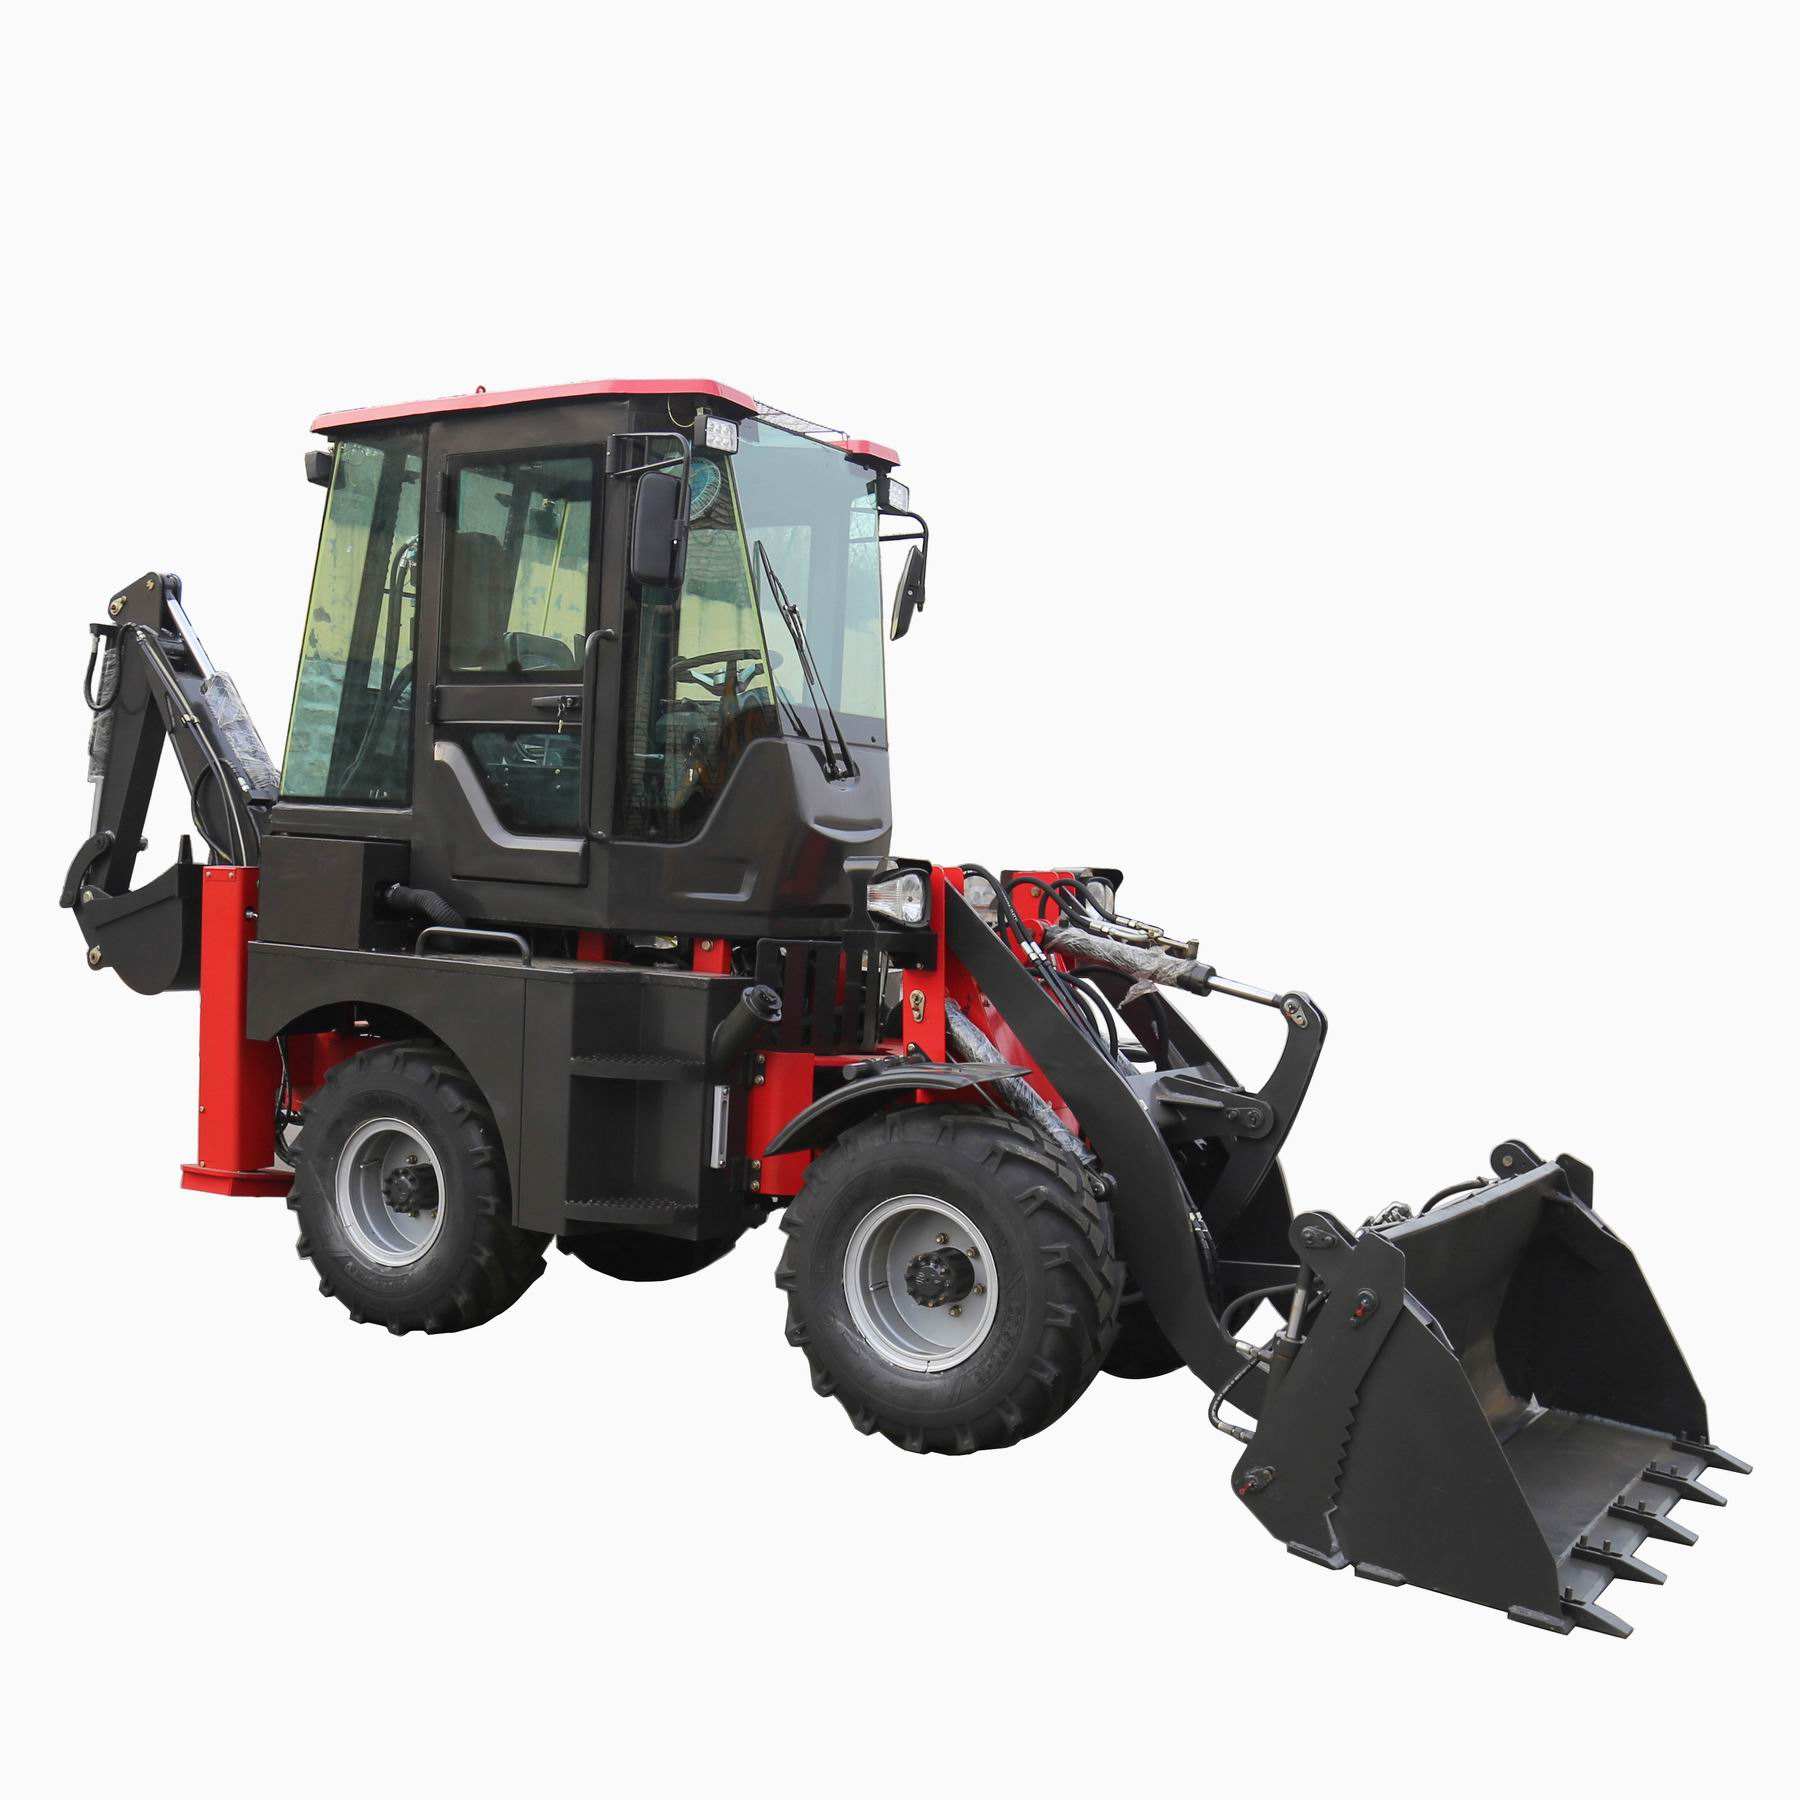 WZ15-10 Backhoe Loader 4x4 Small Attachment with Epa Engine